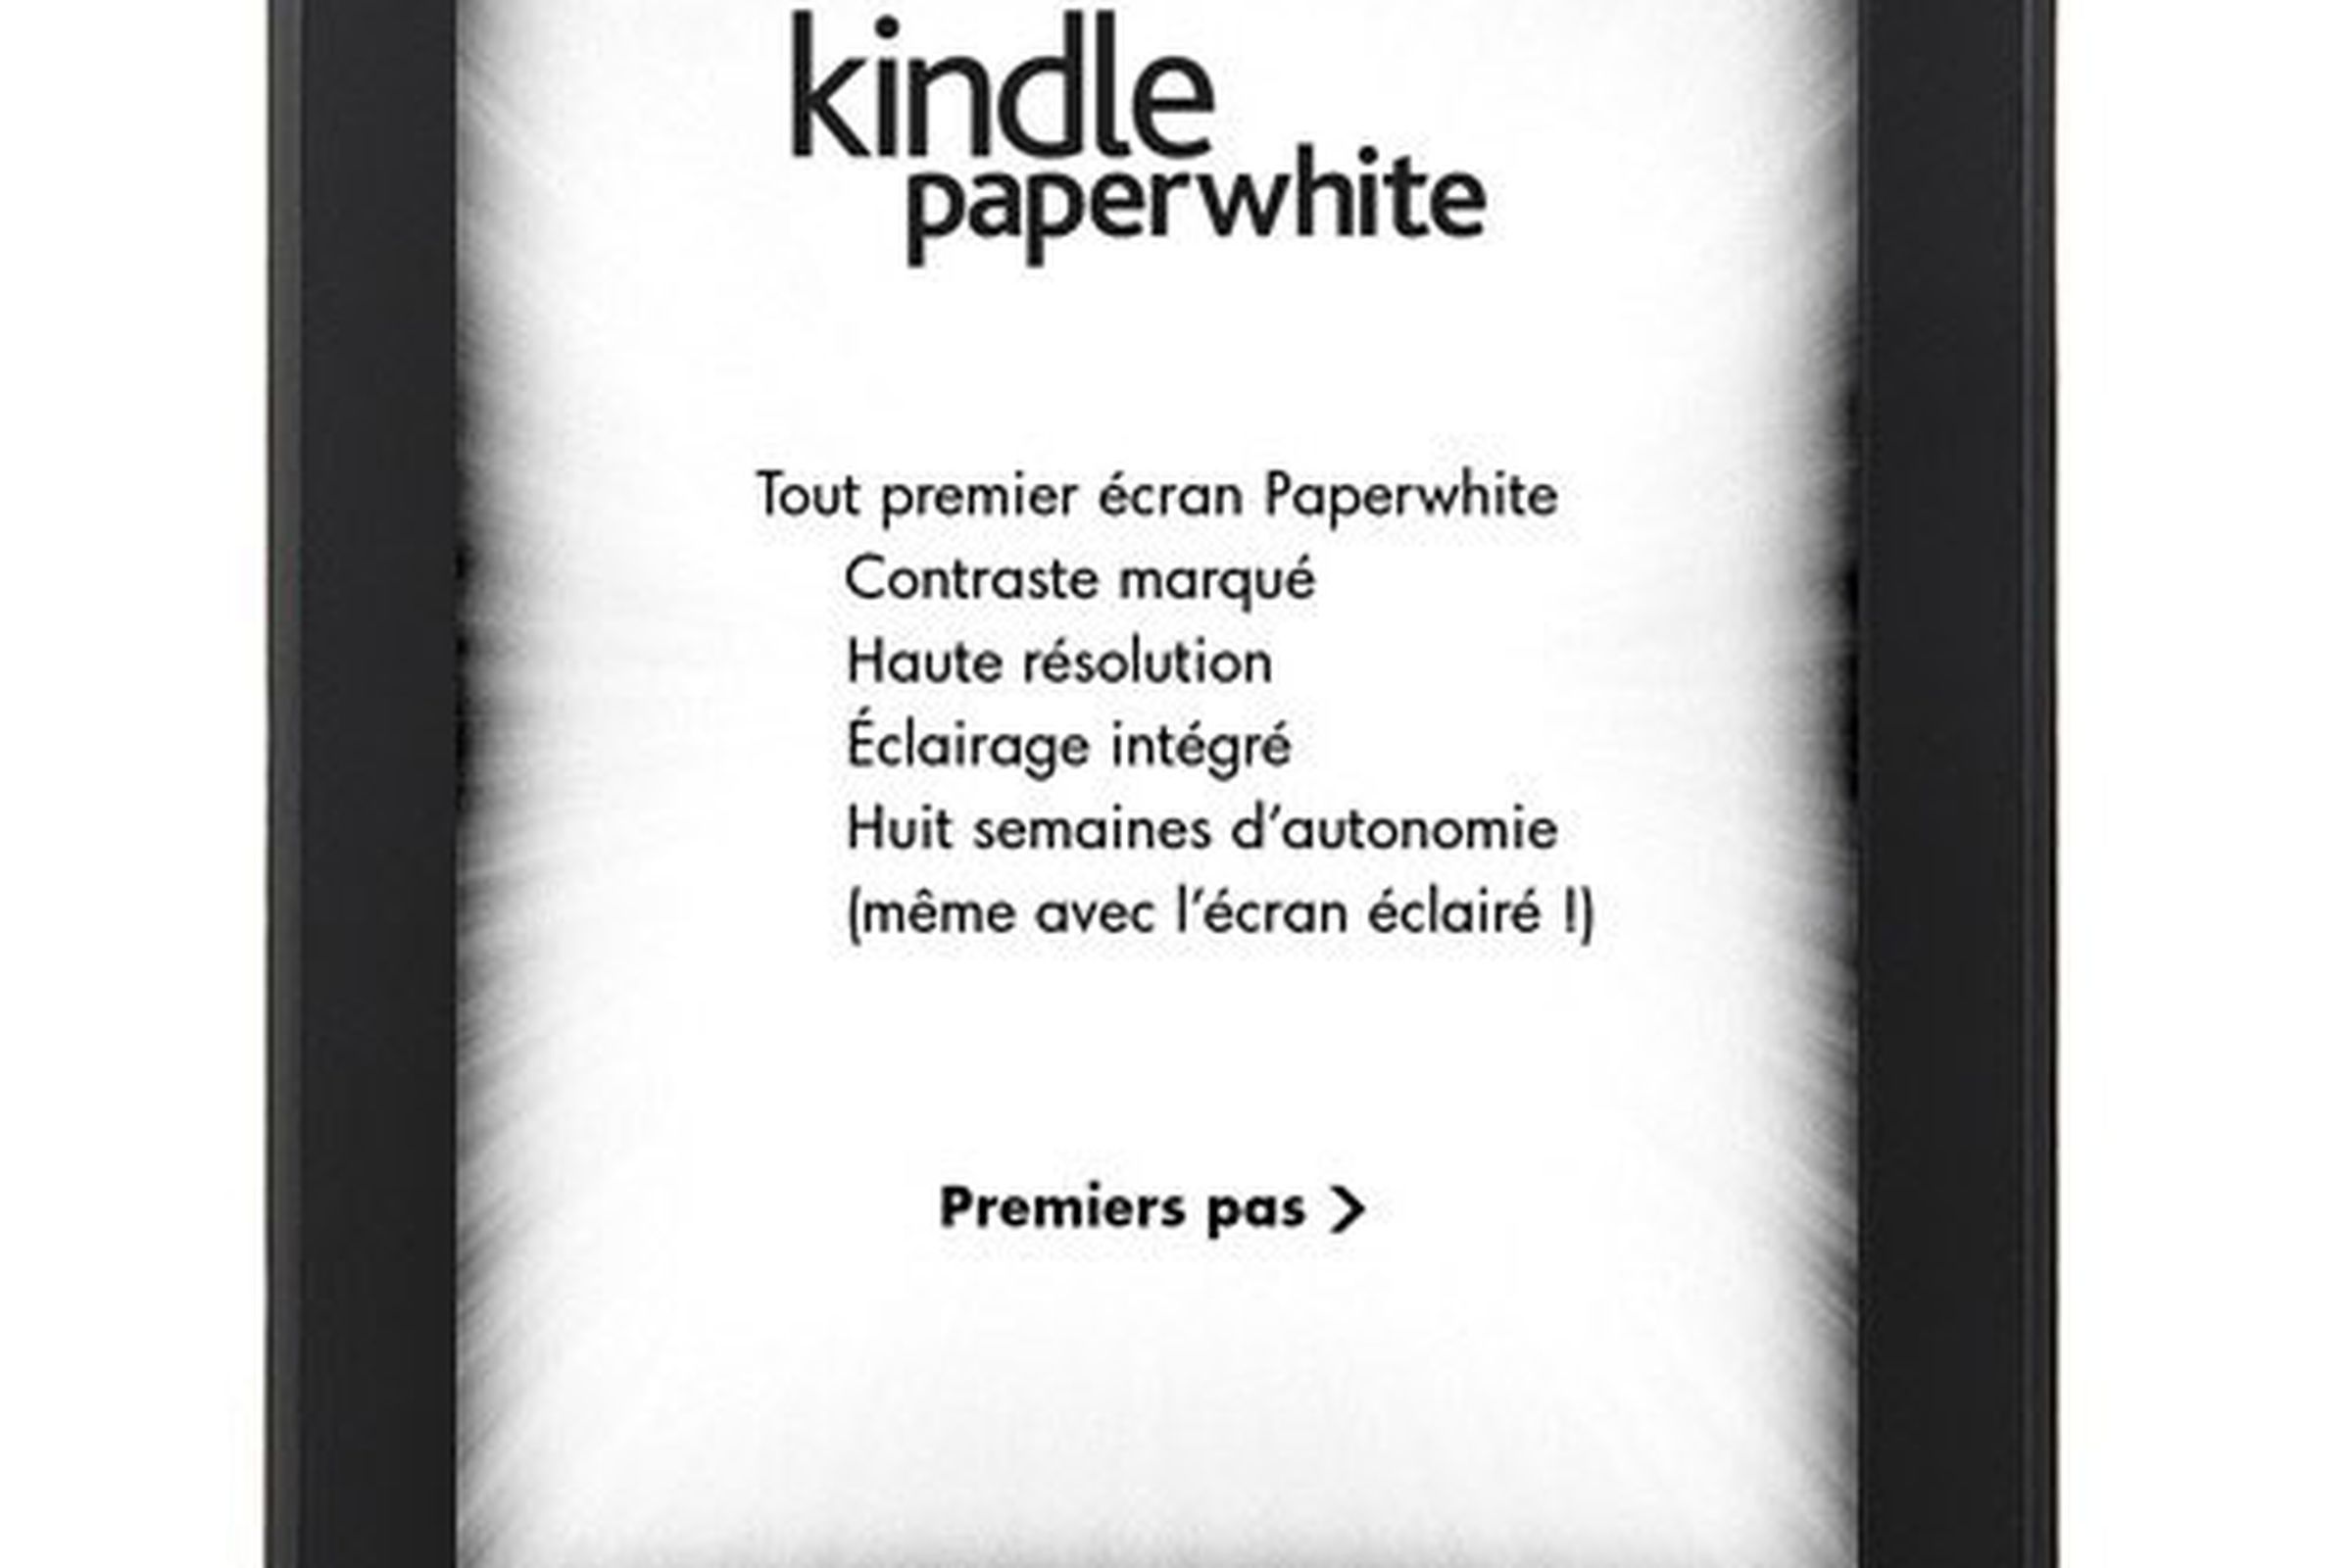 Gallery Photo: Kindle Paperwhite images